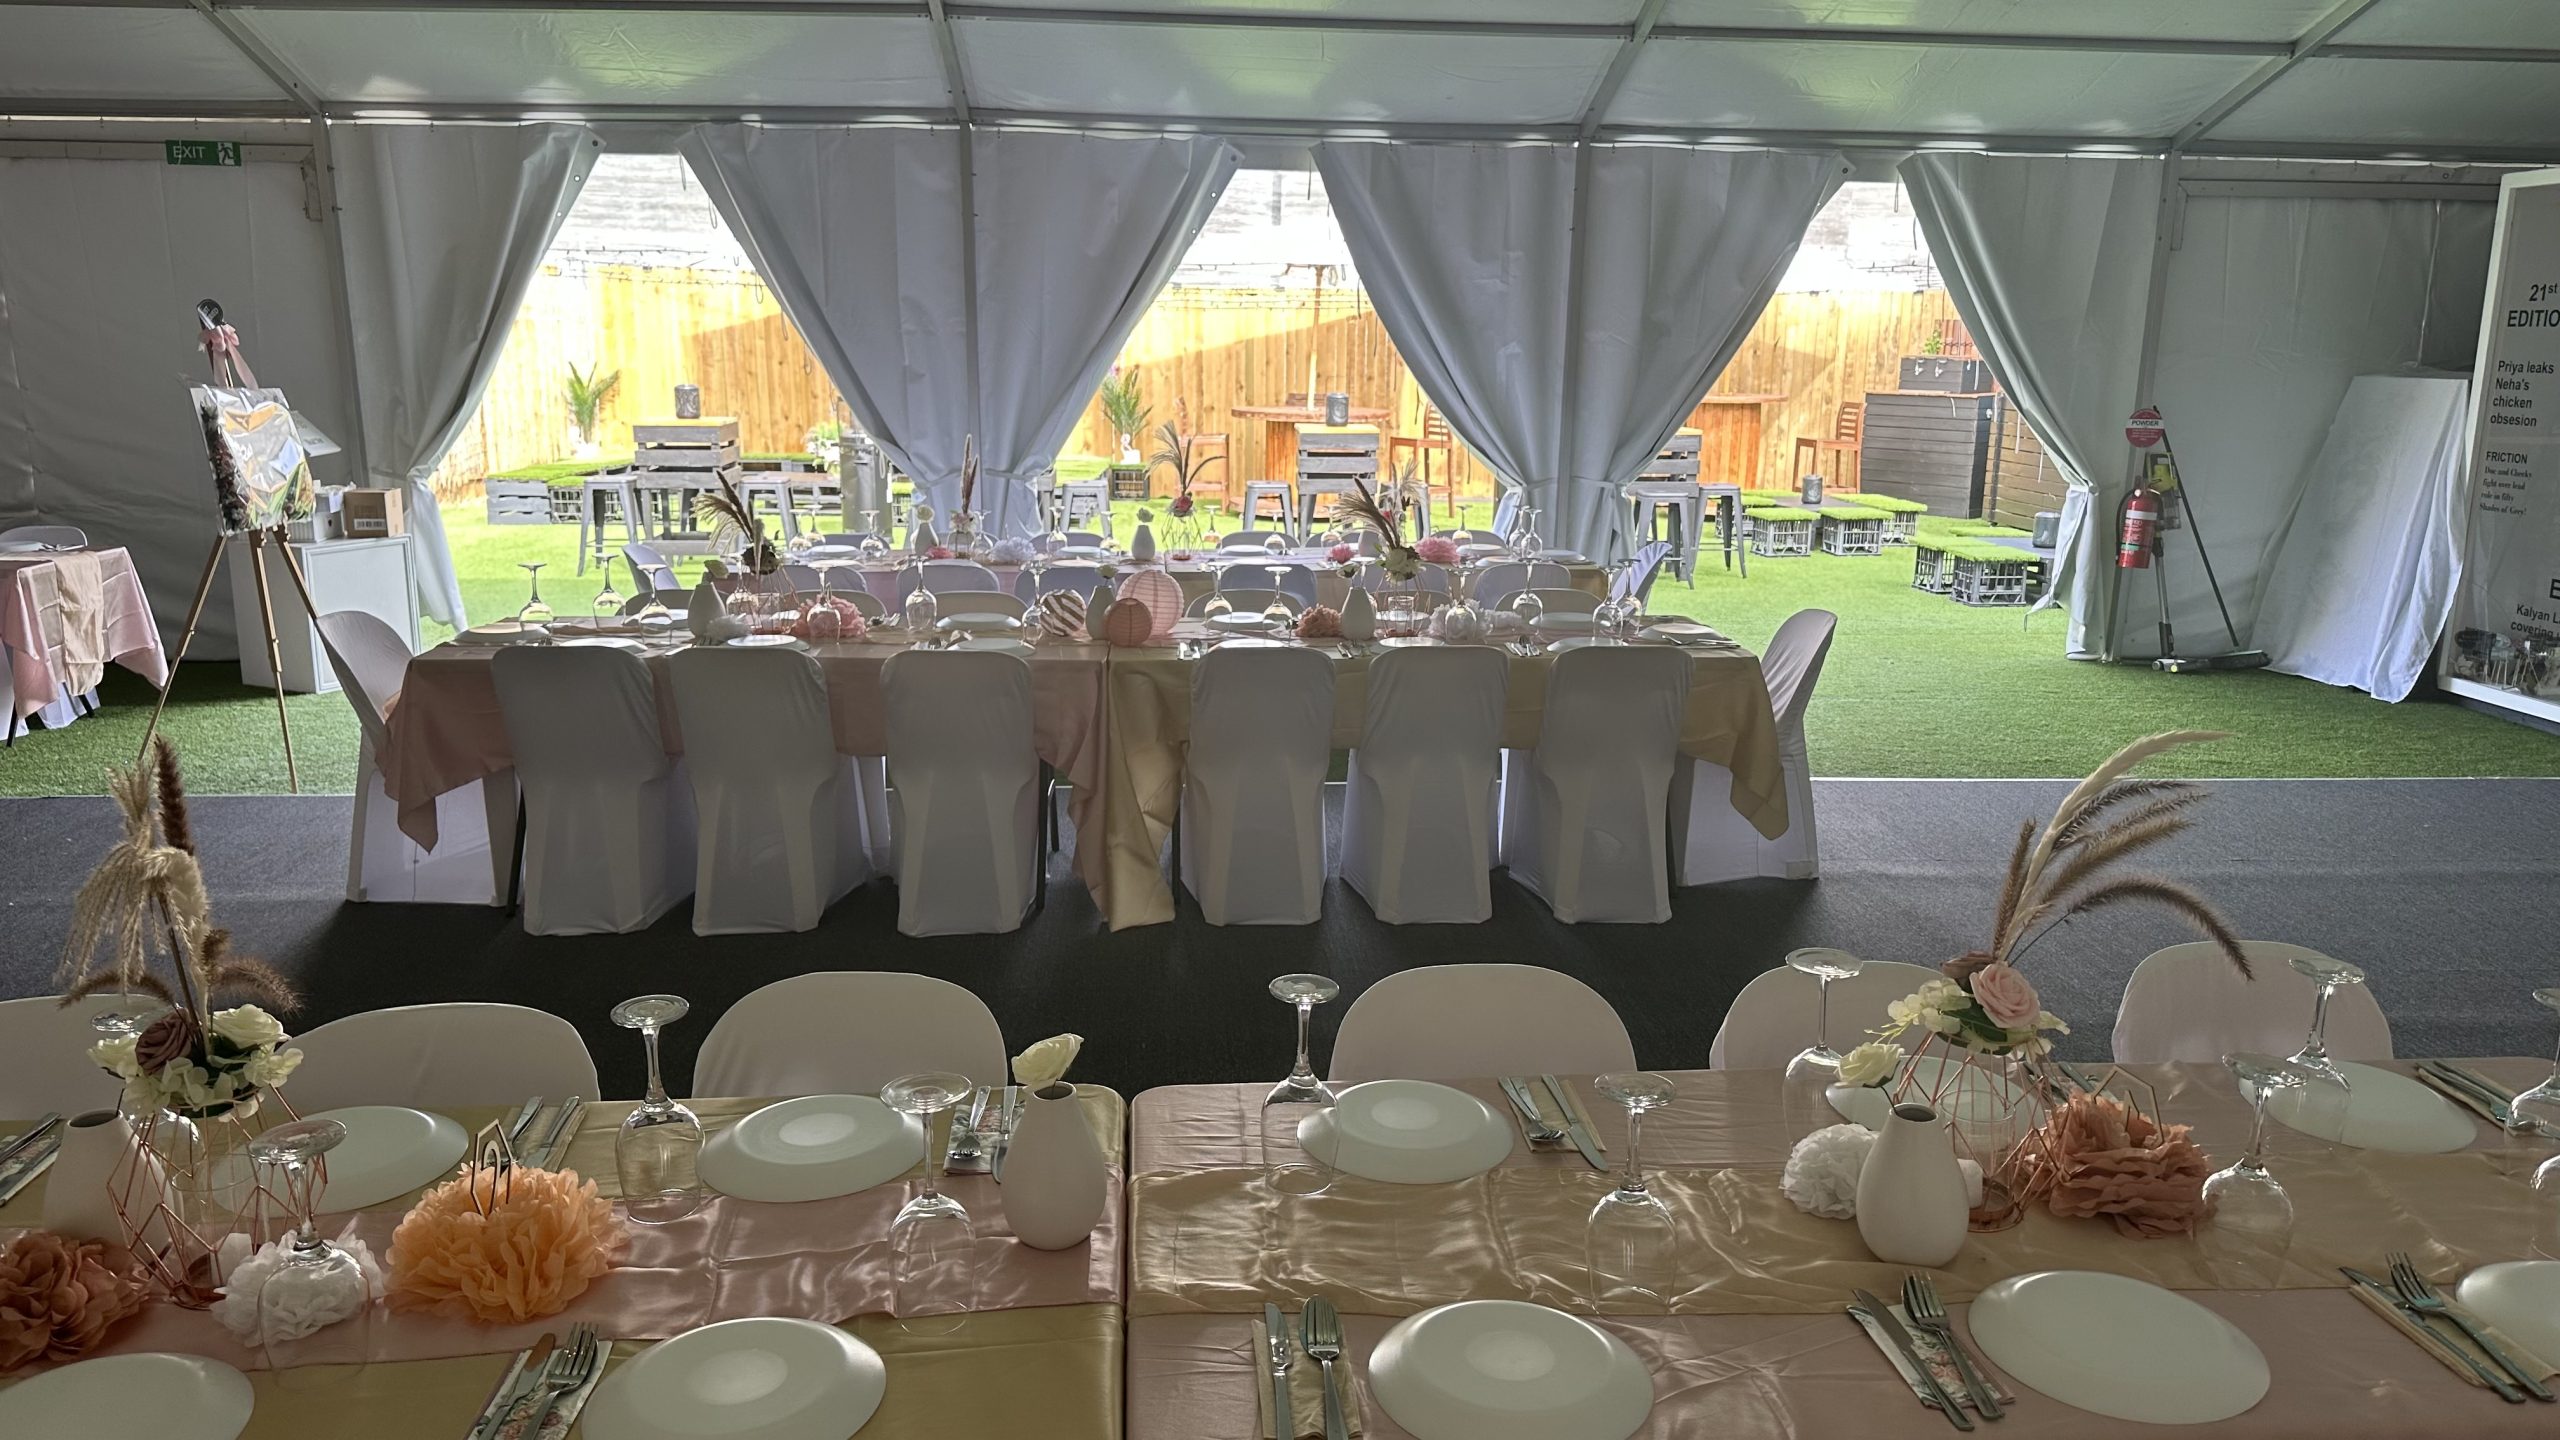 Our event space is a fantastic indoor and outdoor space